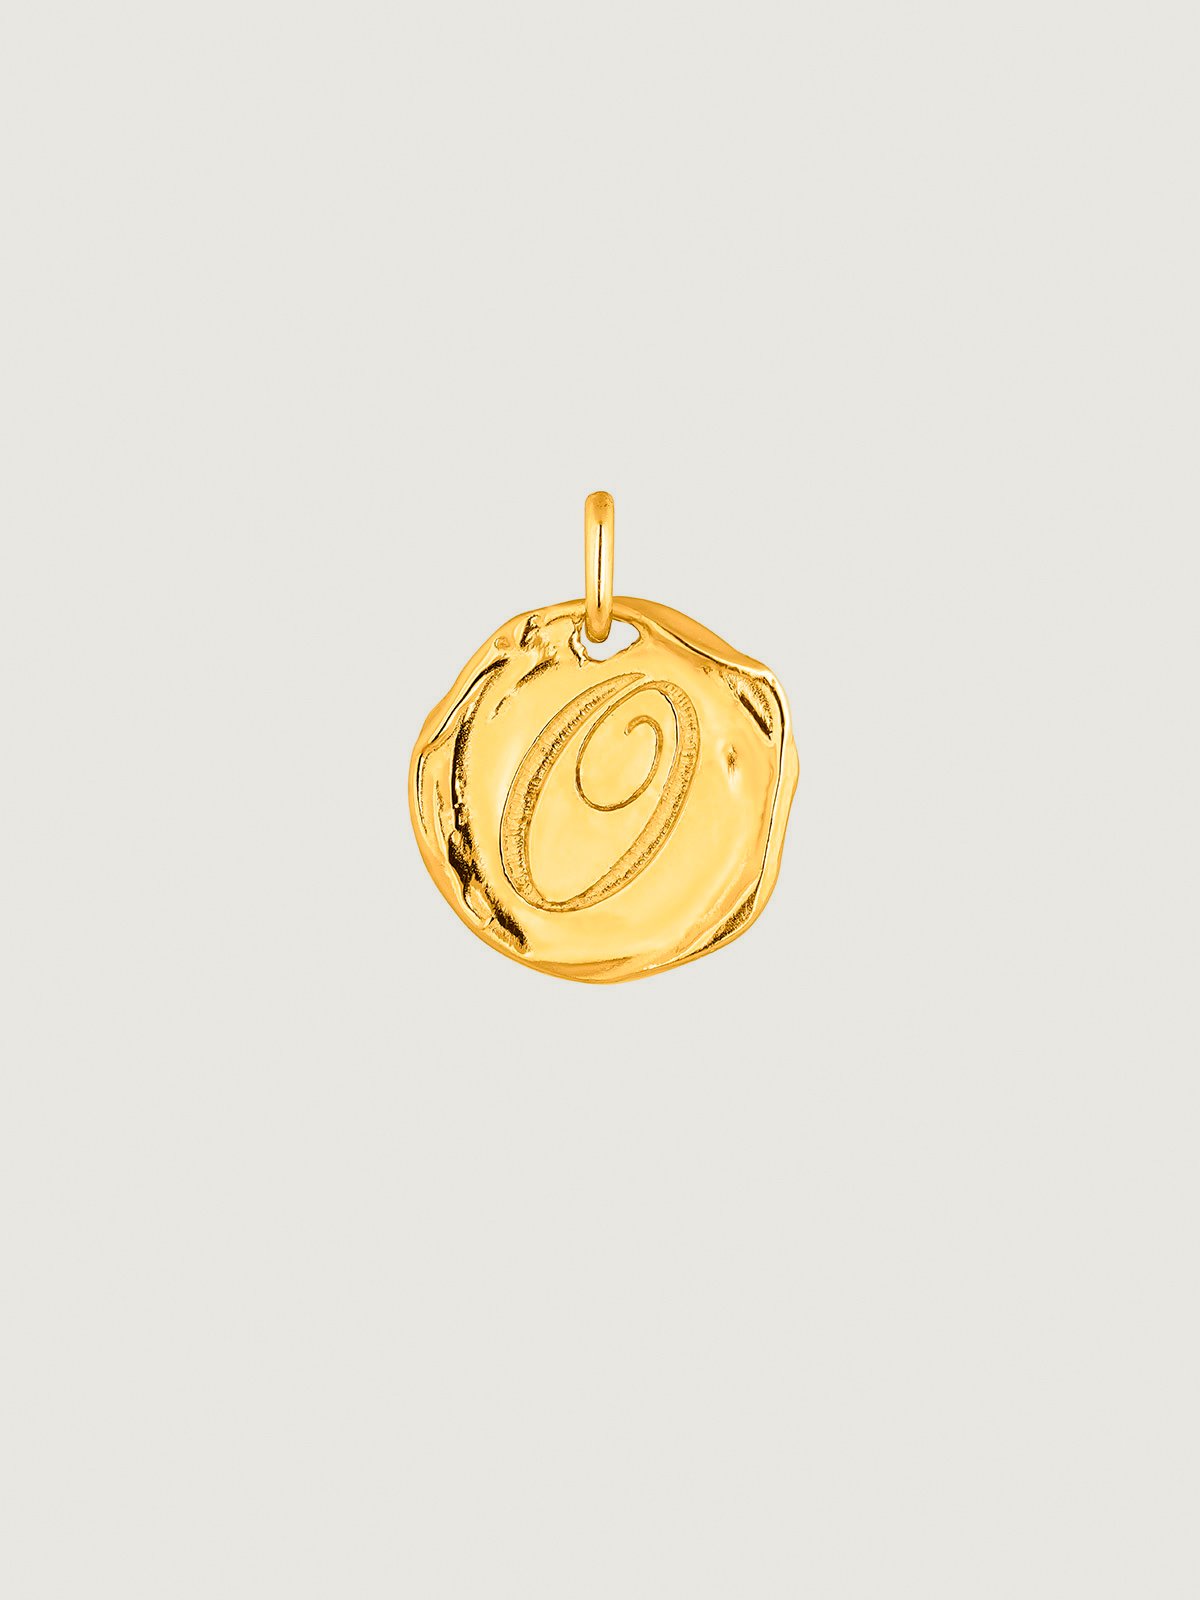 Handcrafted 925 silver charm bathed in 18K yellow gold with initial O